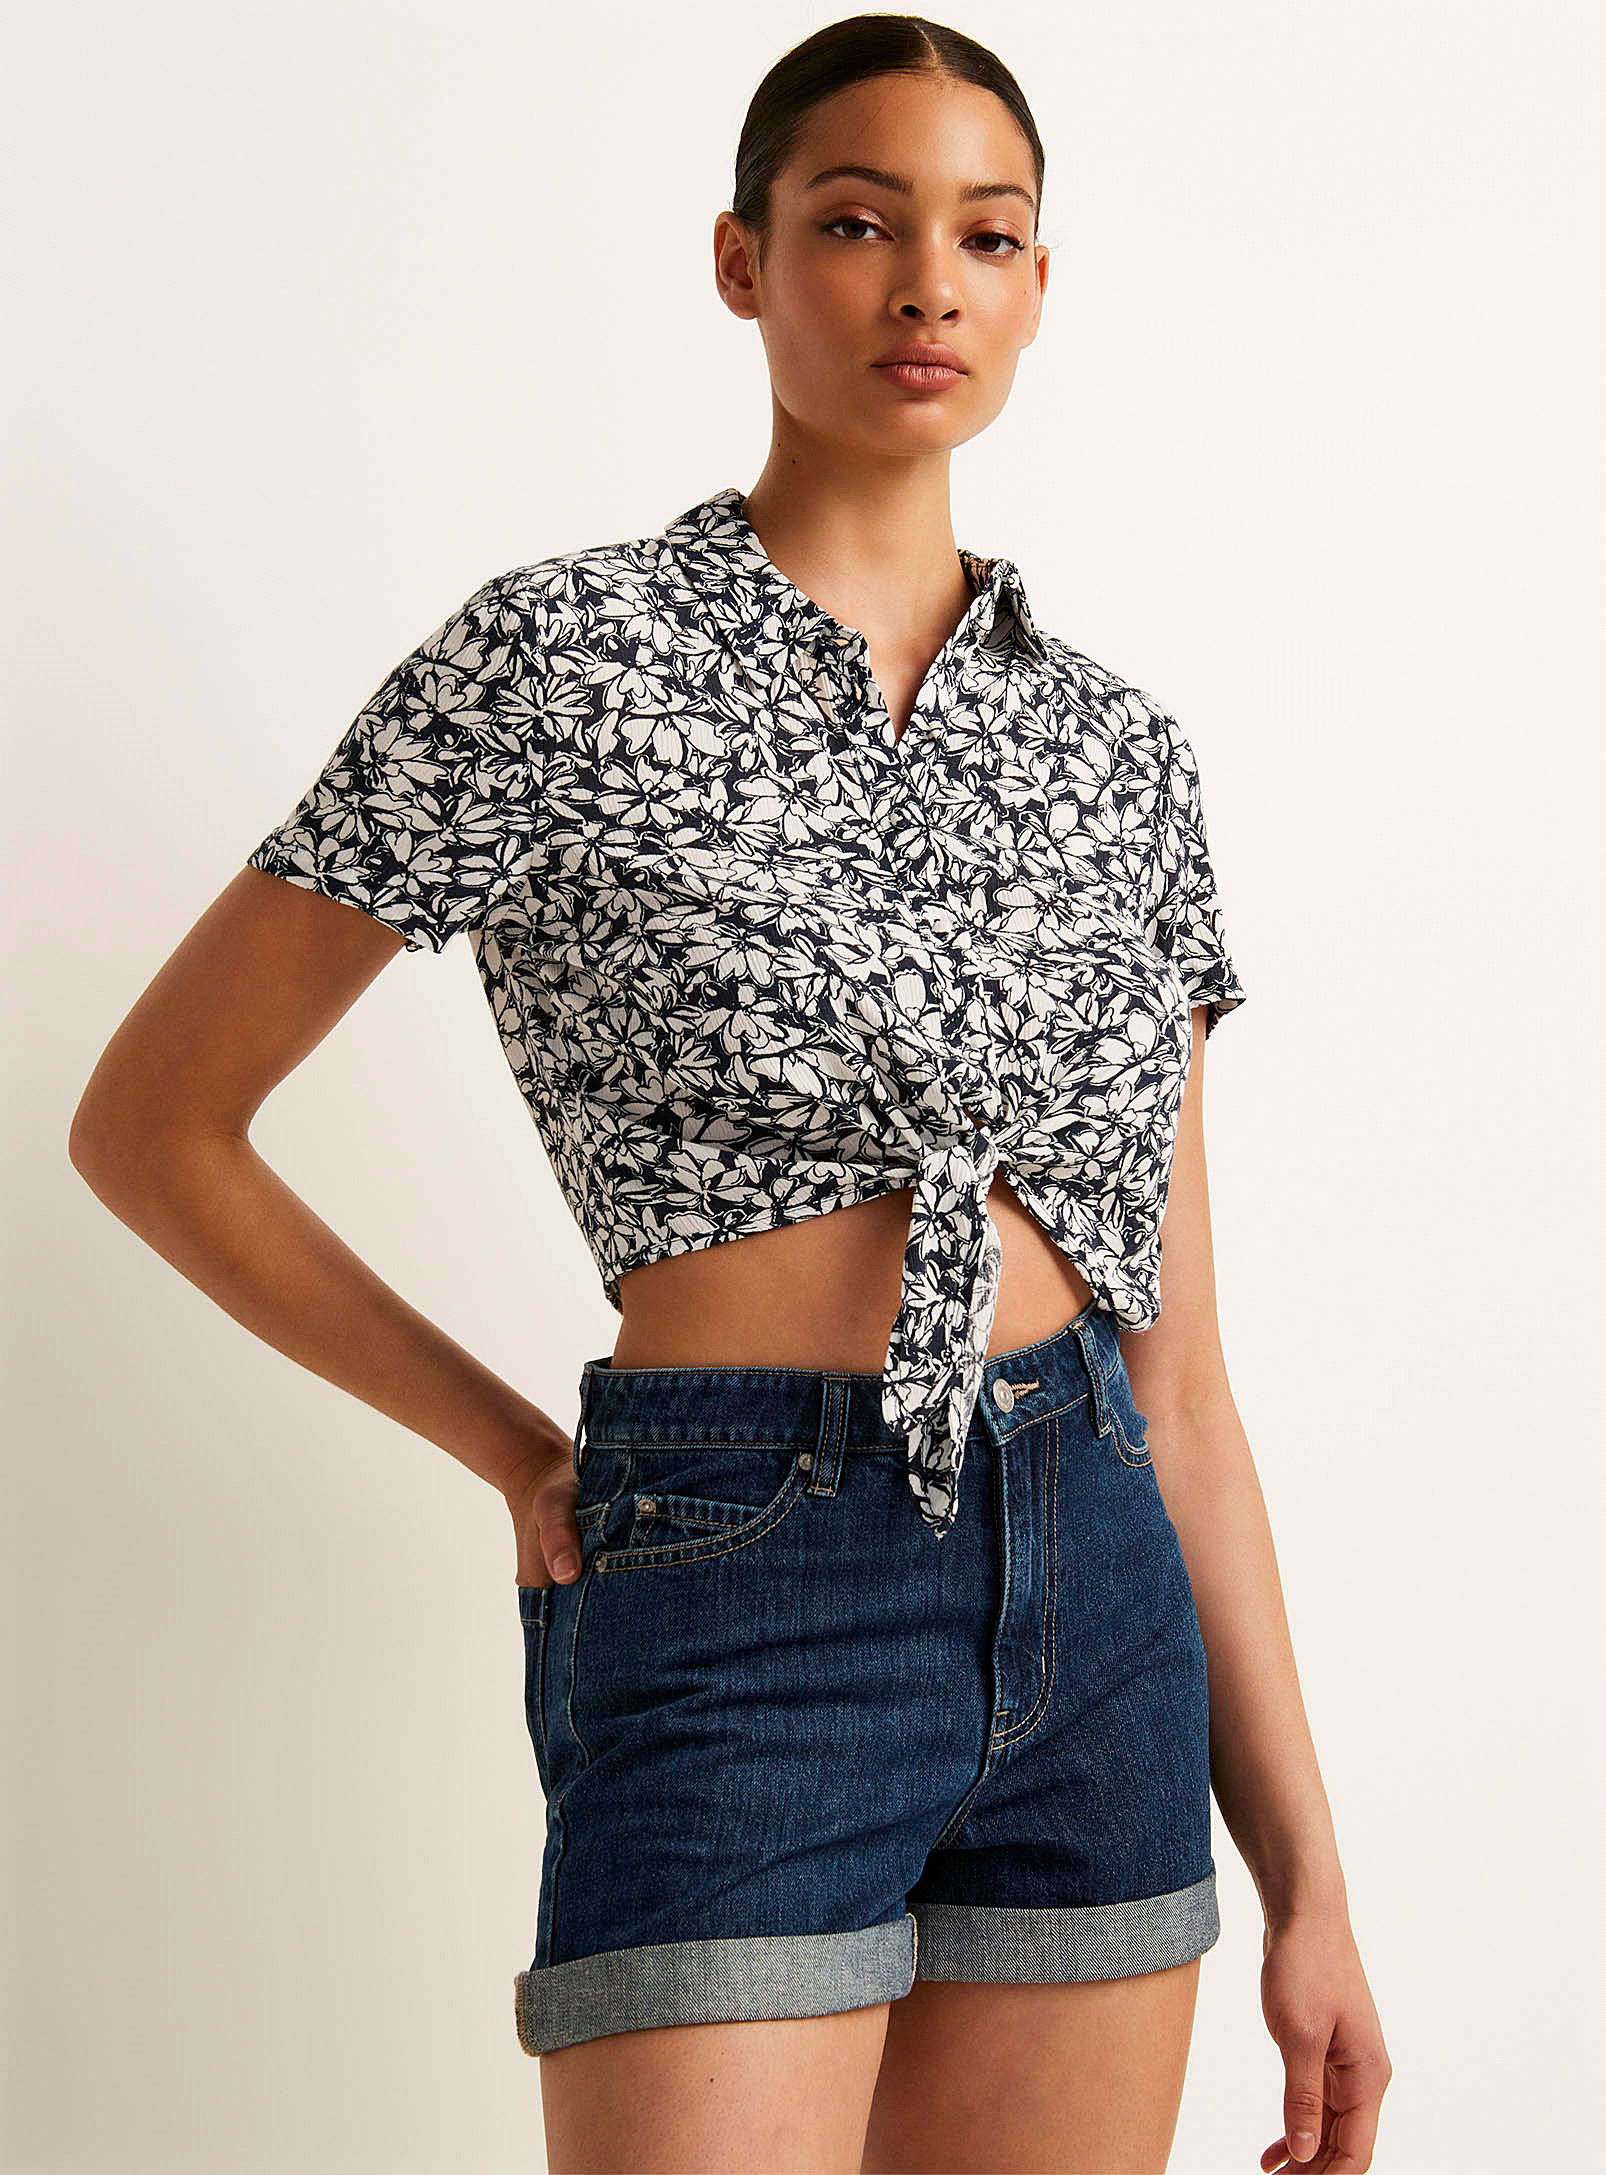 Vero Moda Wrinkled Texture Tie Cropped Blouse In Patterned Blue